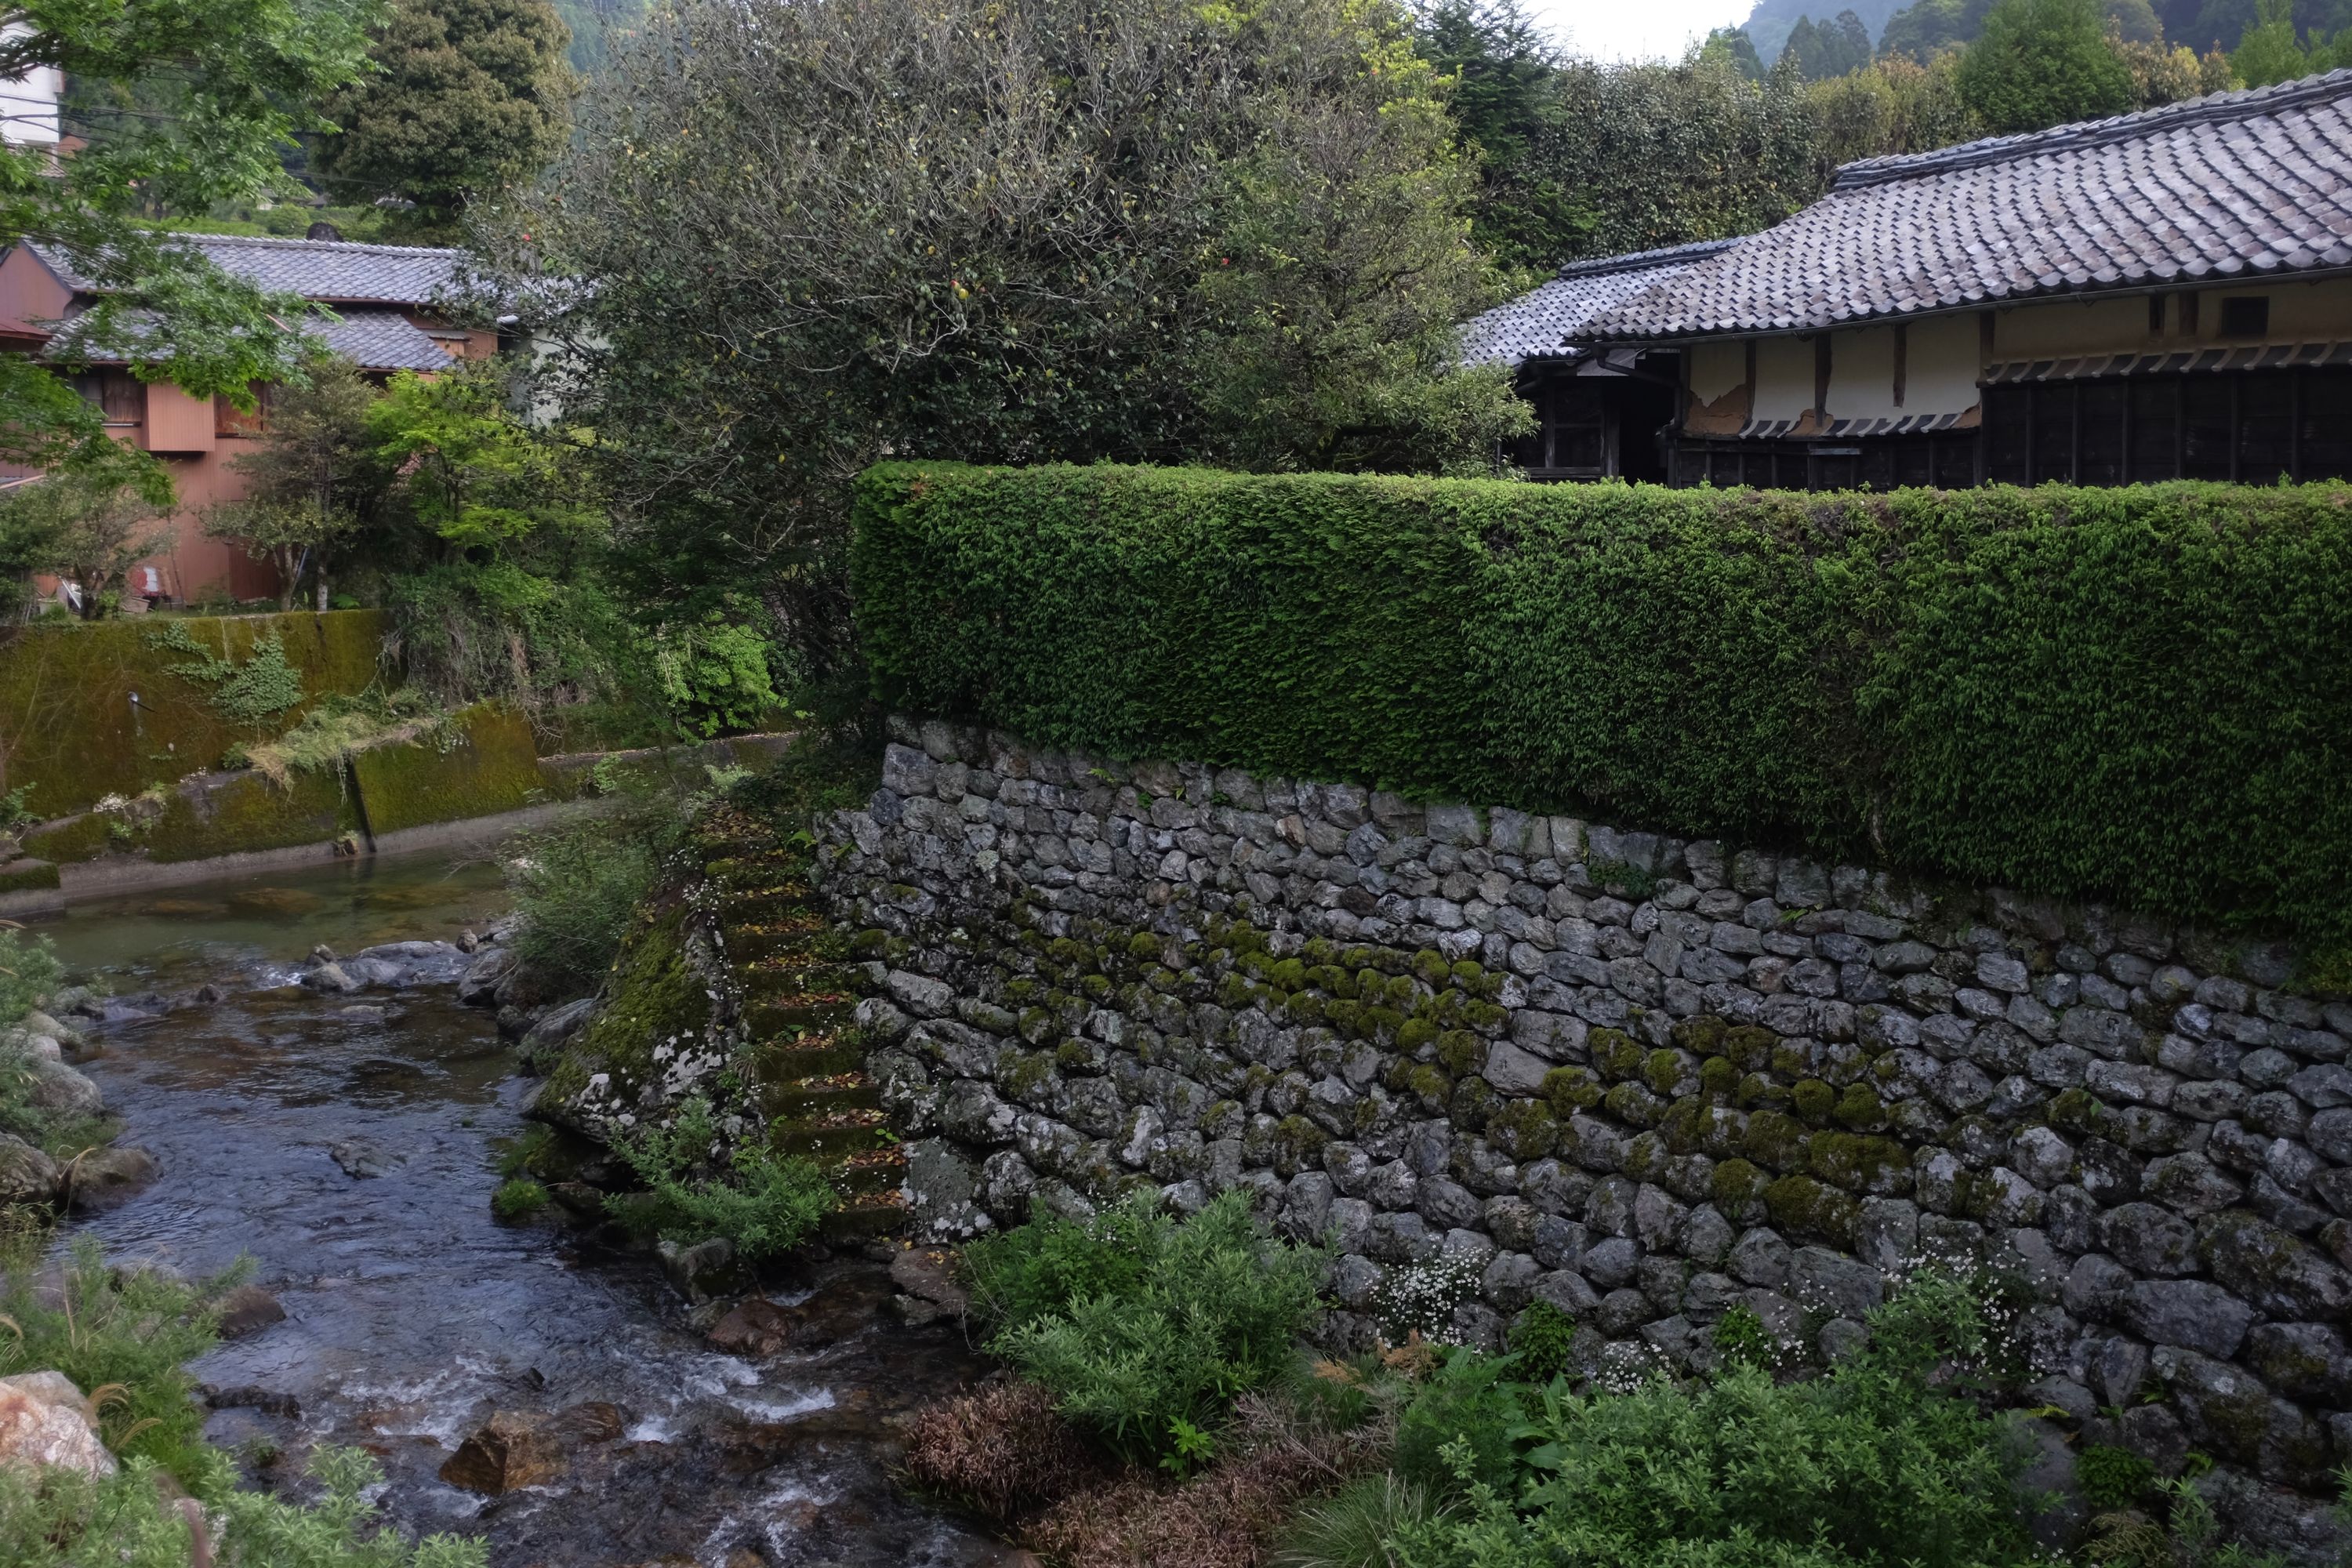 A hedge-topped rock wall protects a Japanese-style house, barely visible, from the waters of a stream.